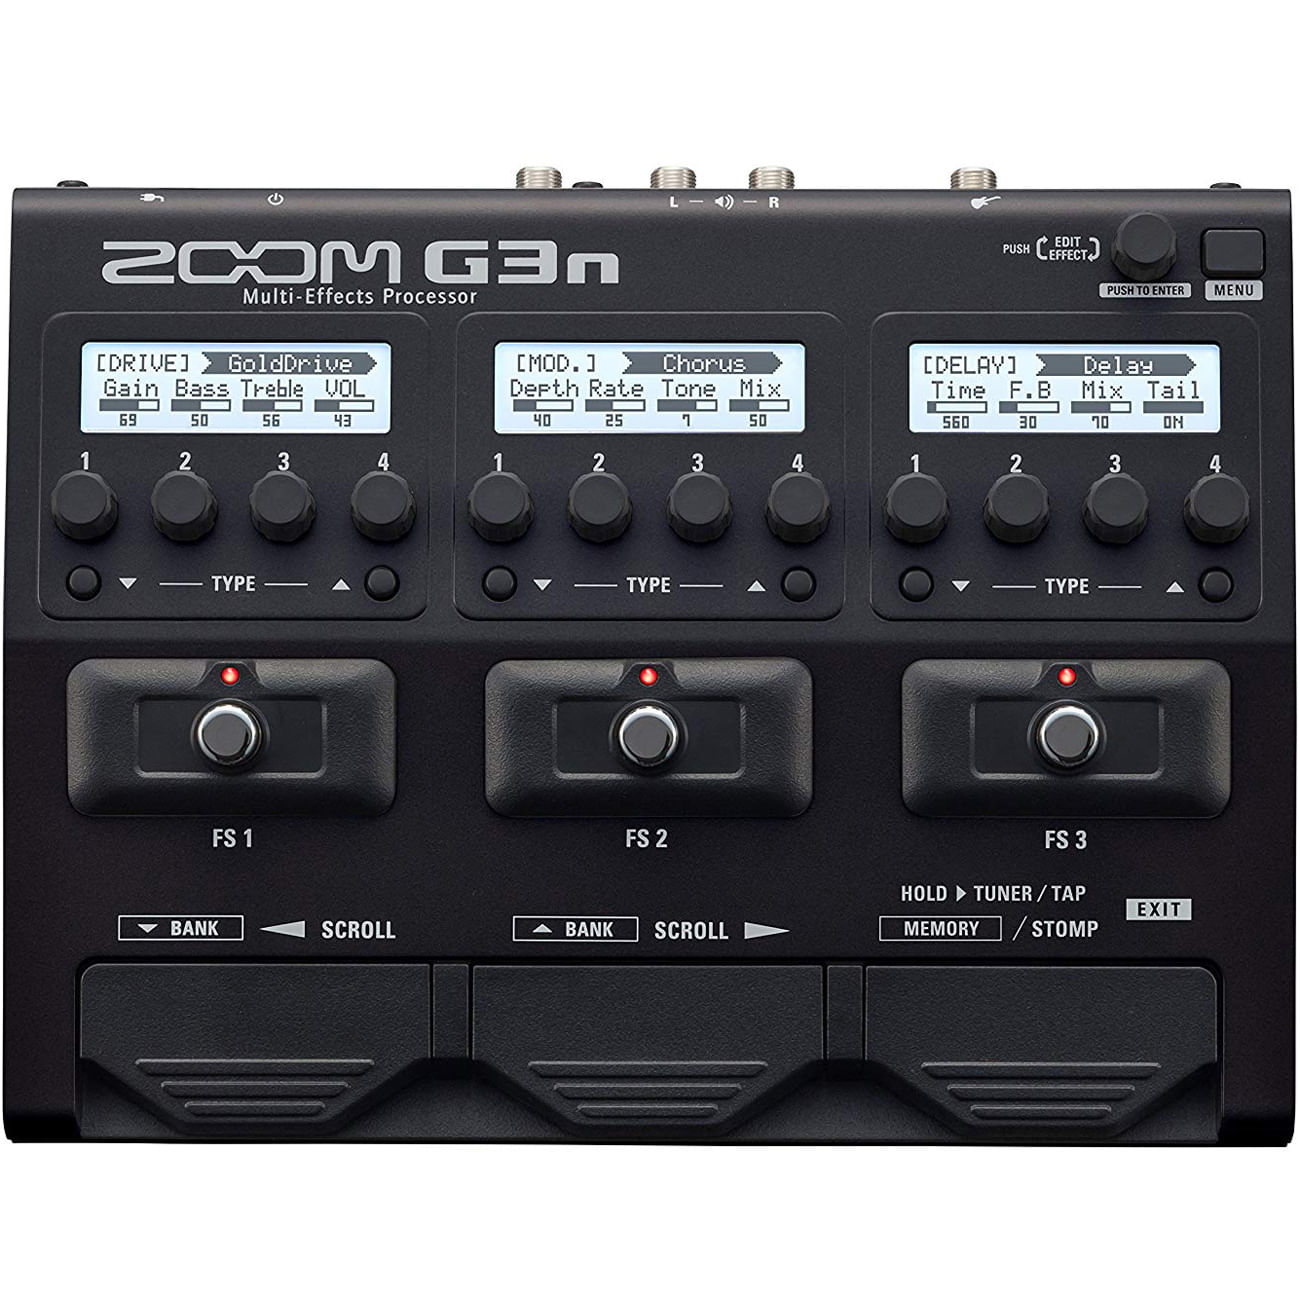 Zoom G3N Multi-Effects Processor - Cosmo Music